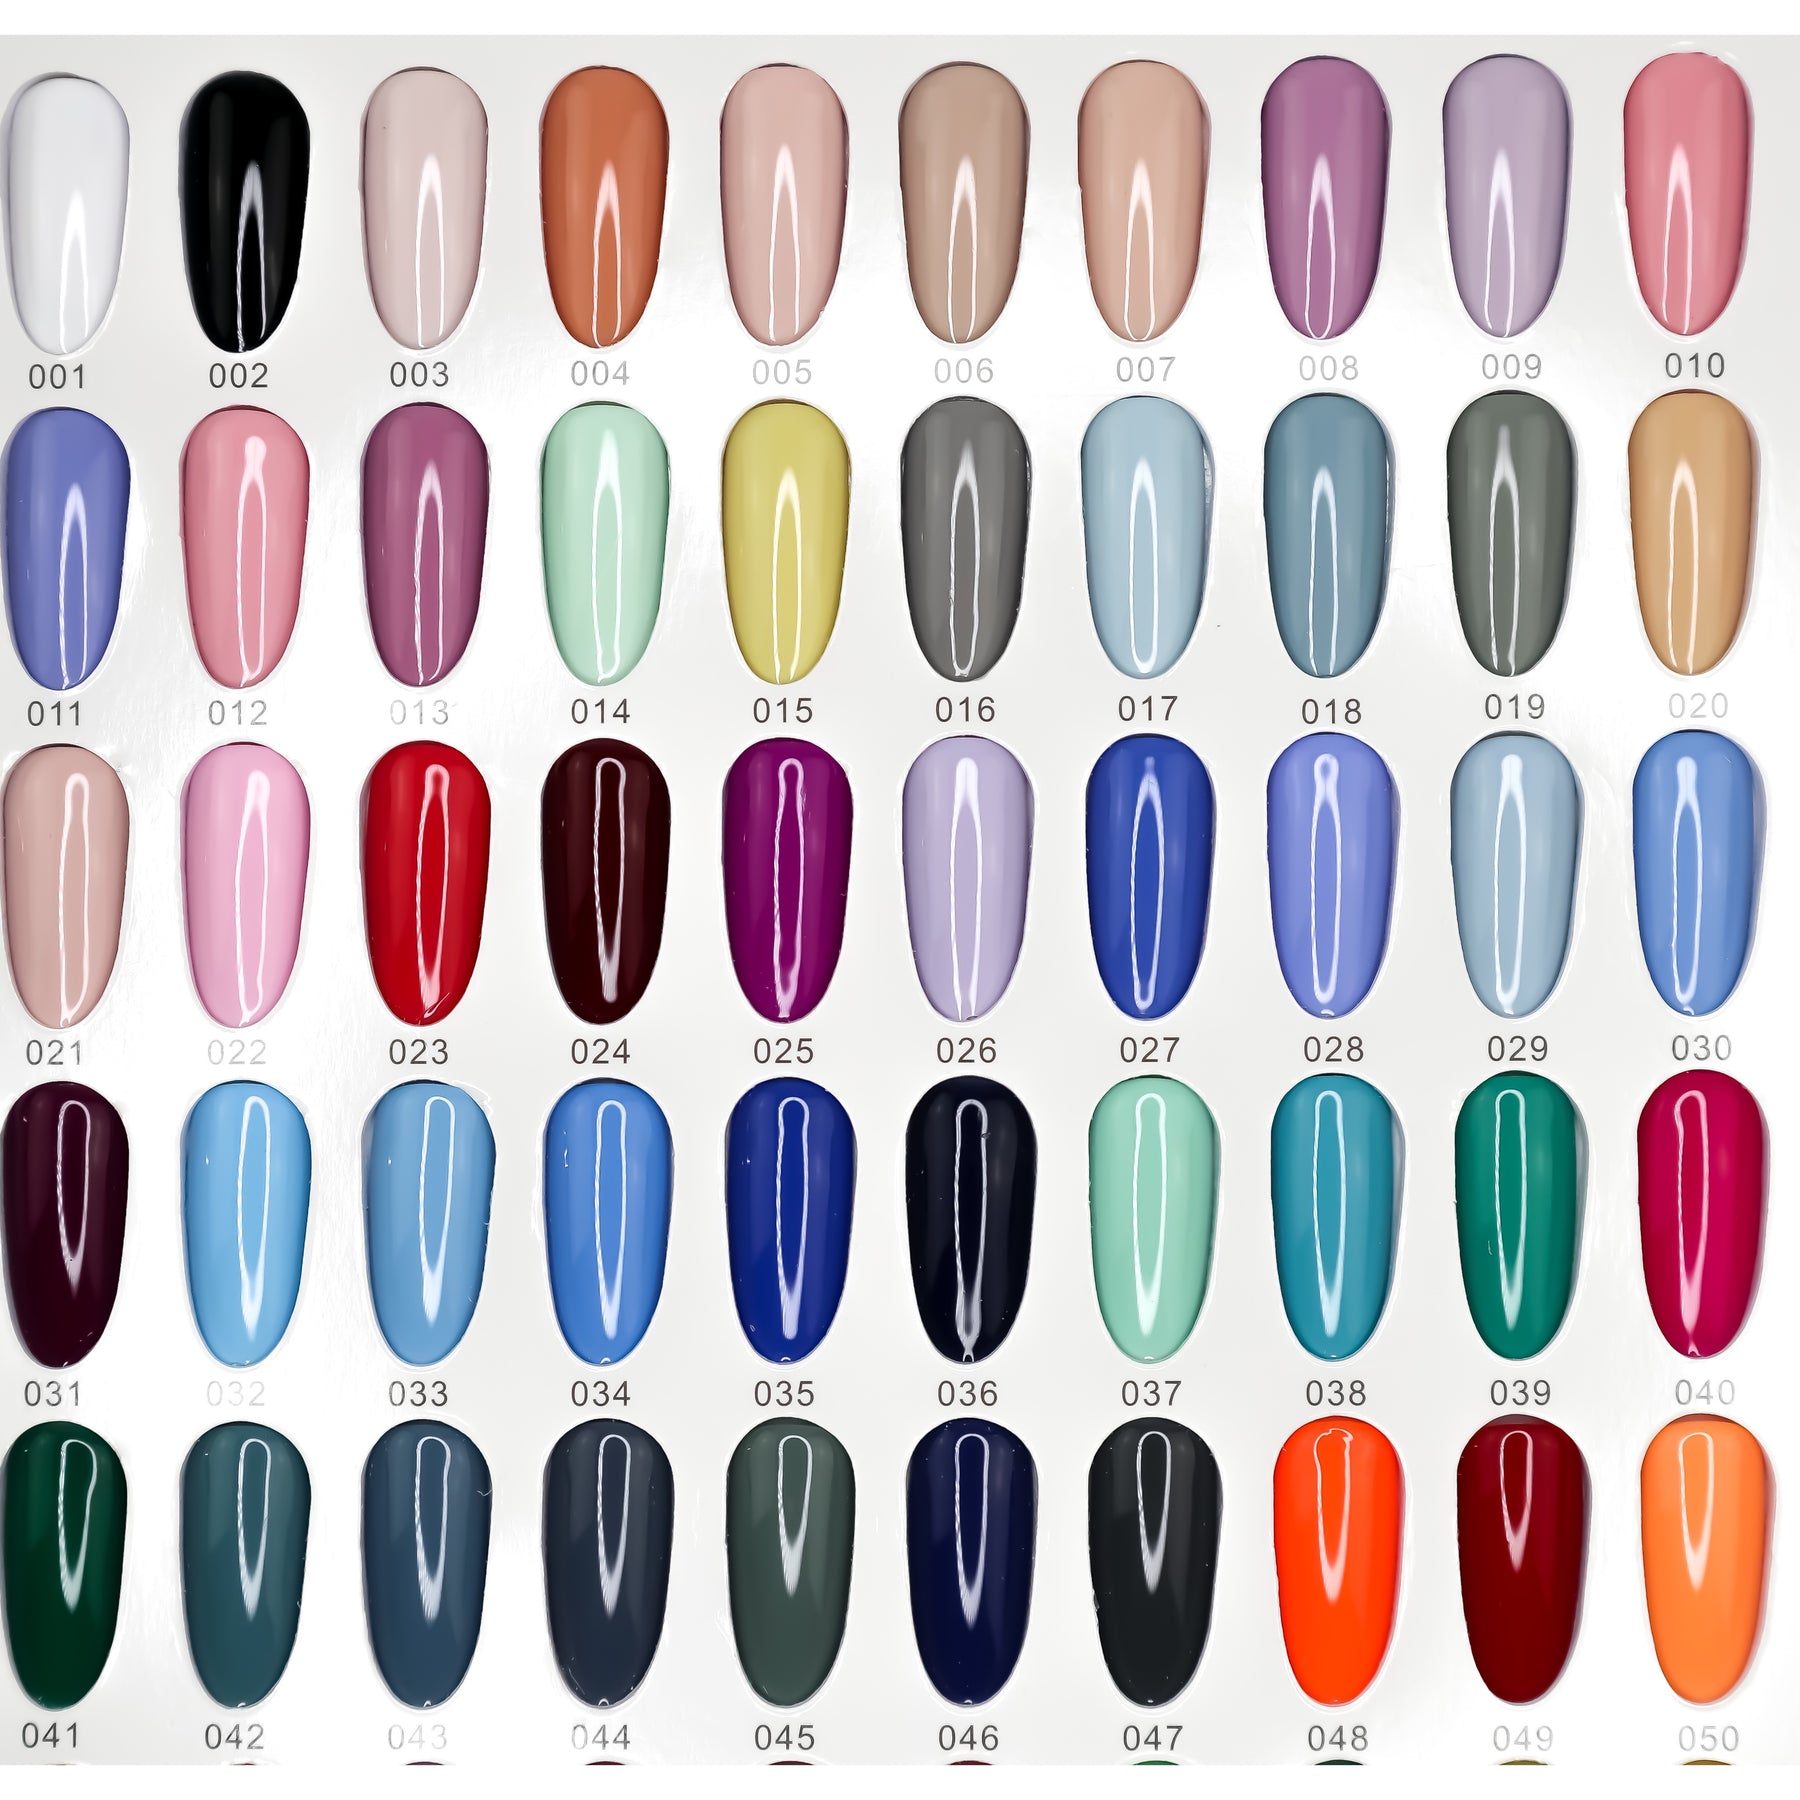 Top Neutral Nail Polish Colors for Every Skin Tone - An Unblurred Lady |  Christmas nails acrylic, Winter nails acrylic, Polygel nails